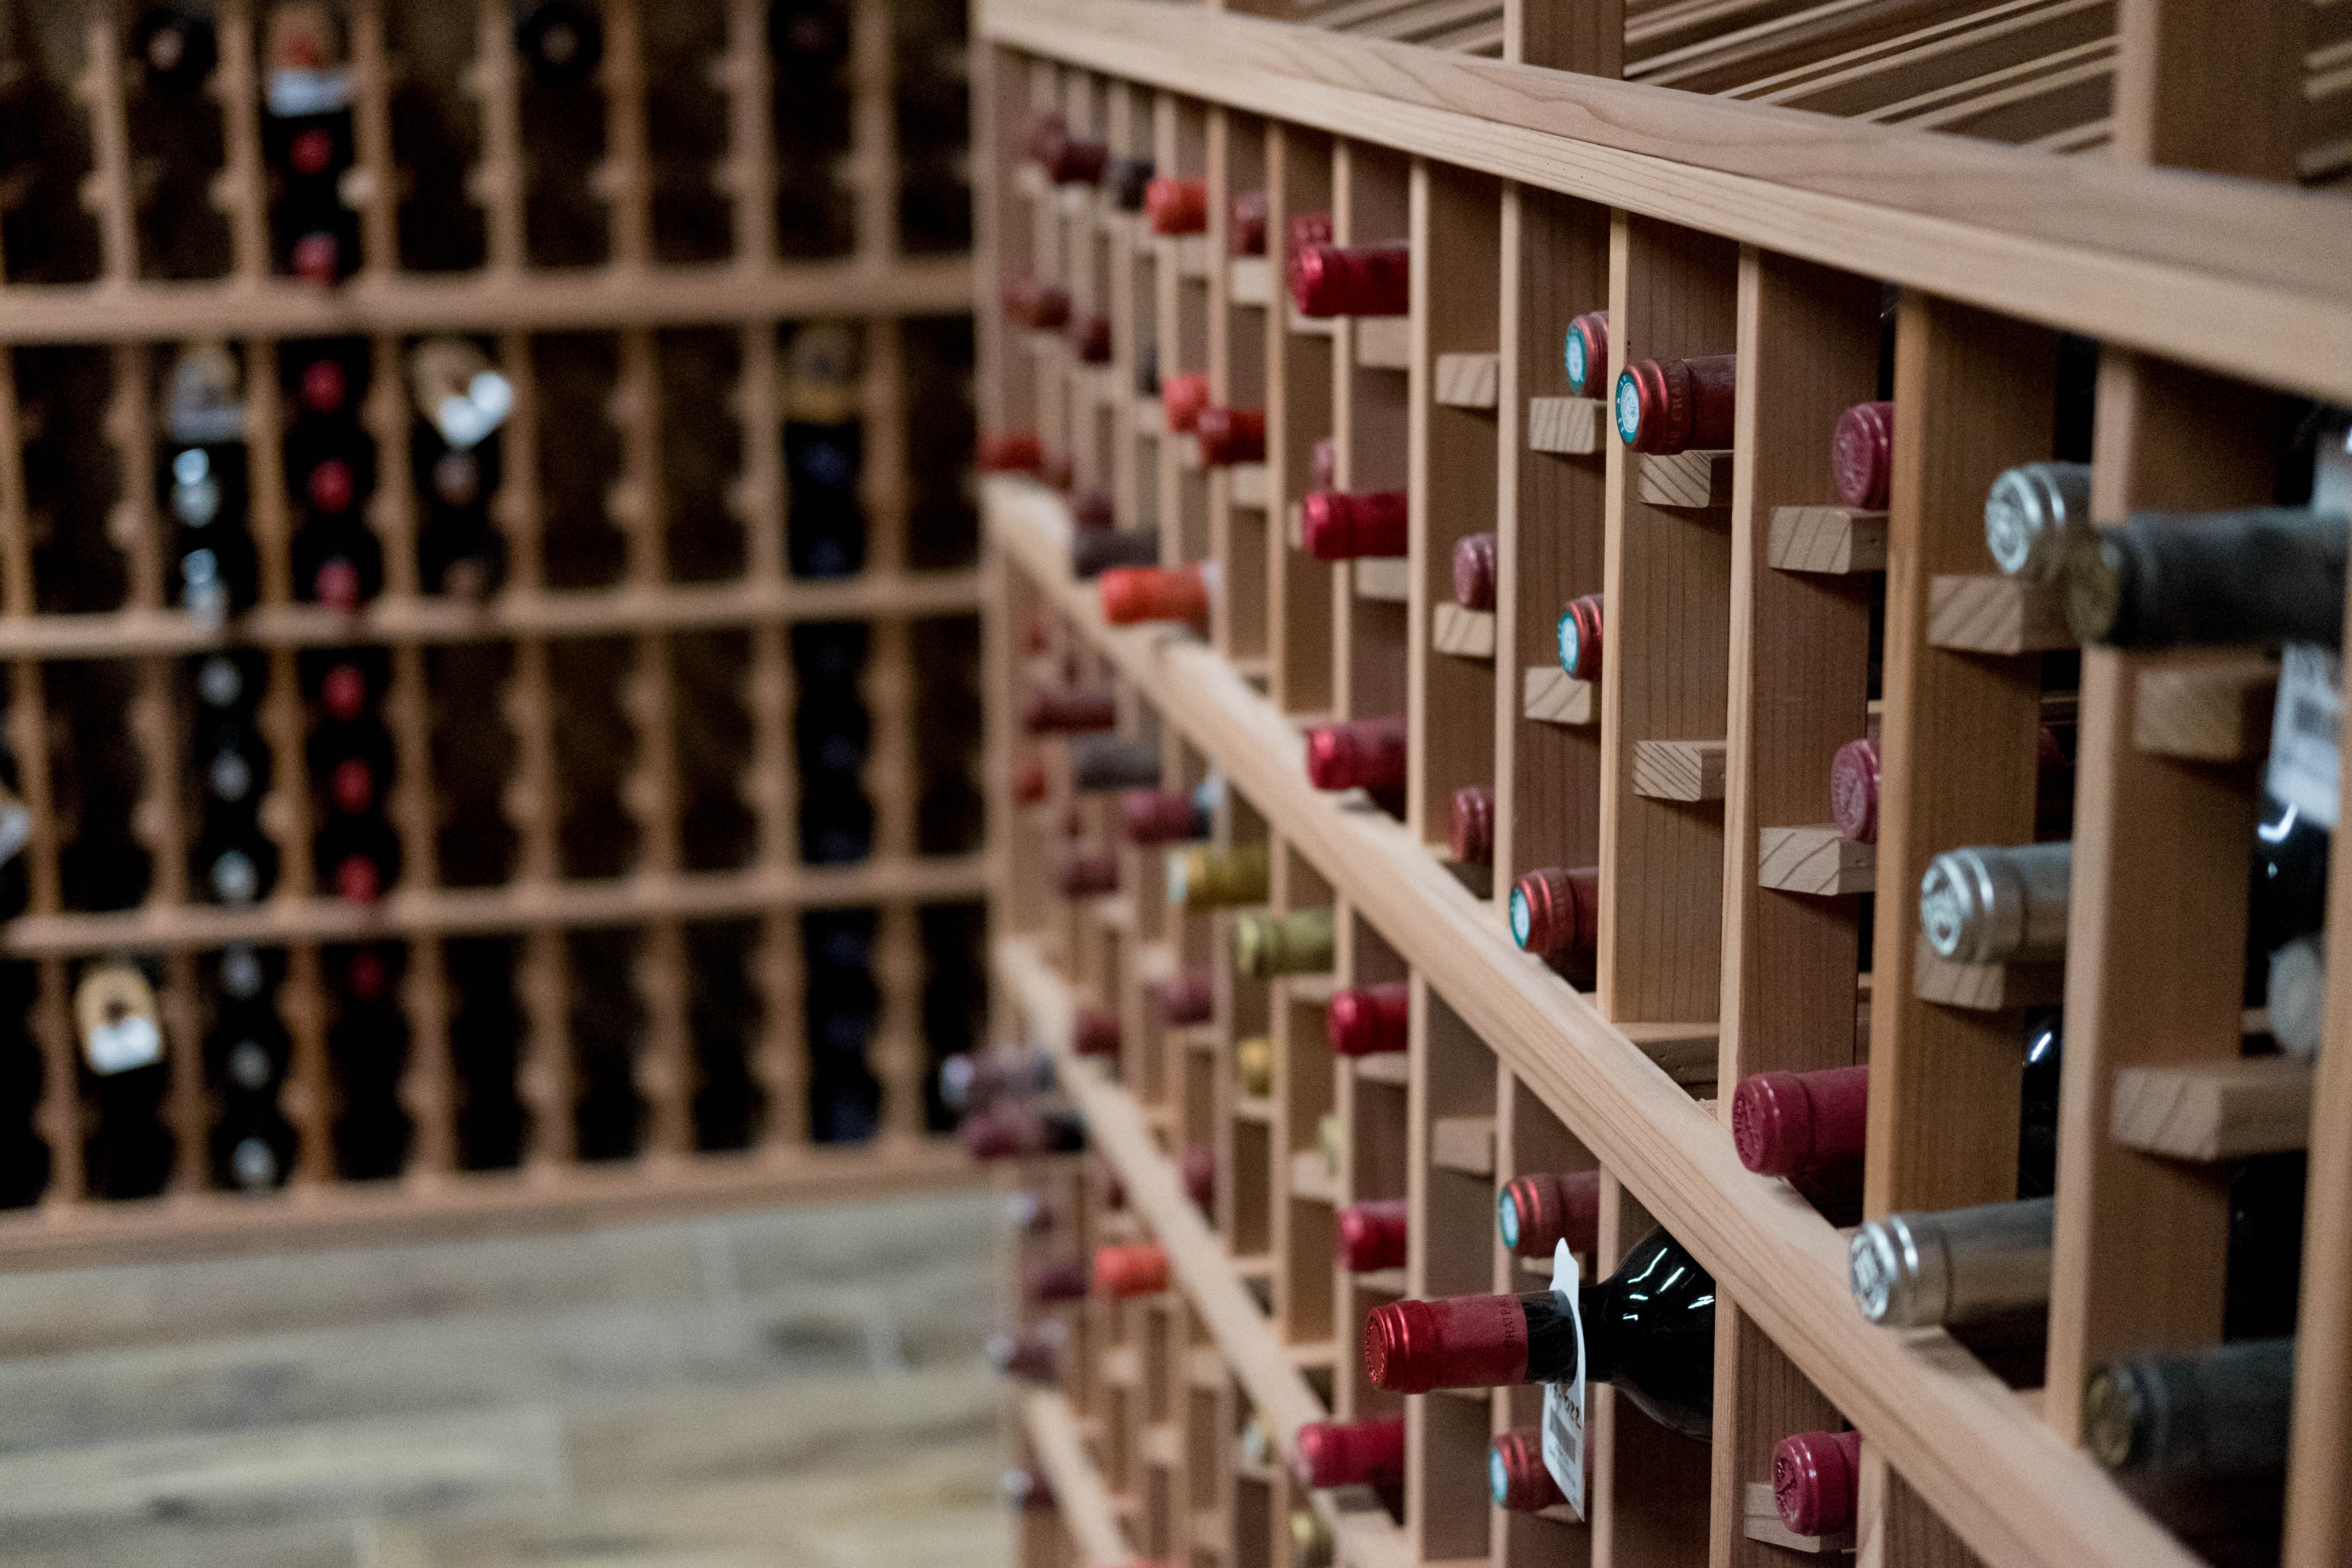 a large amount of wine bottles stored in wine racks